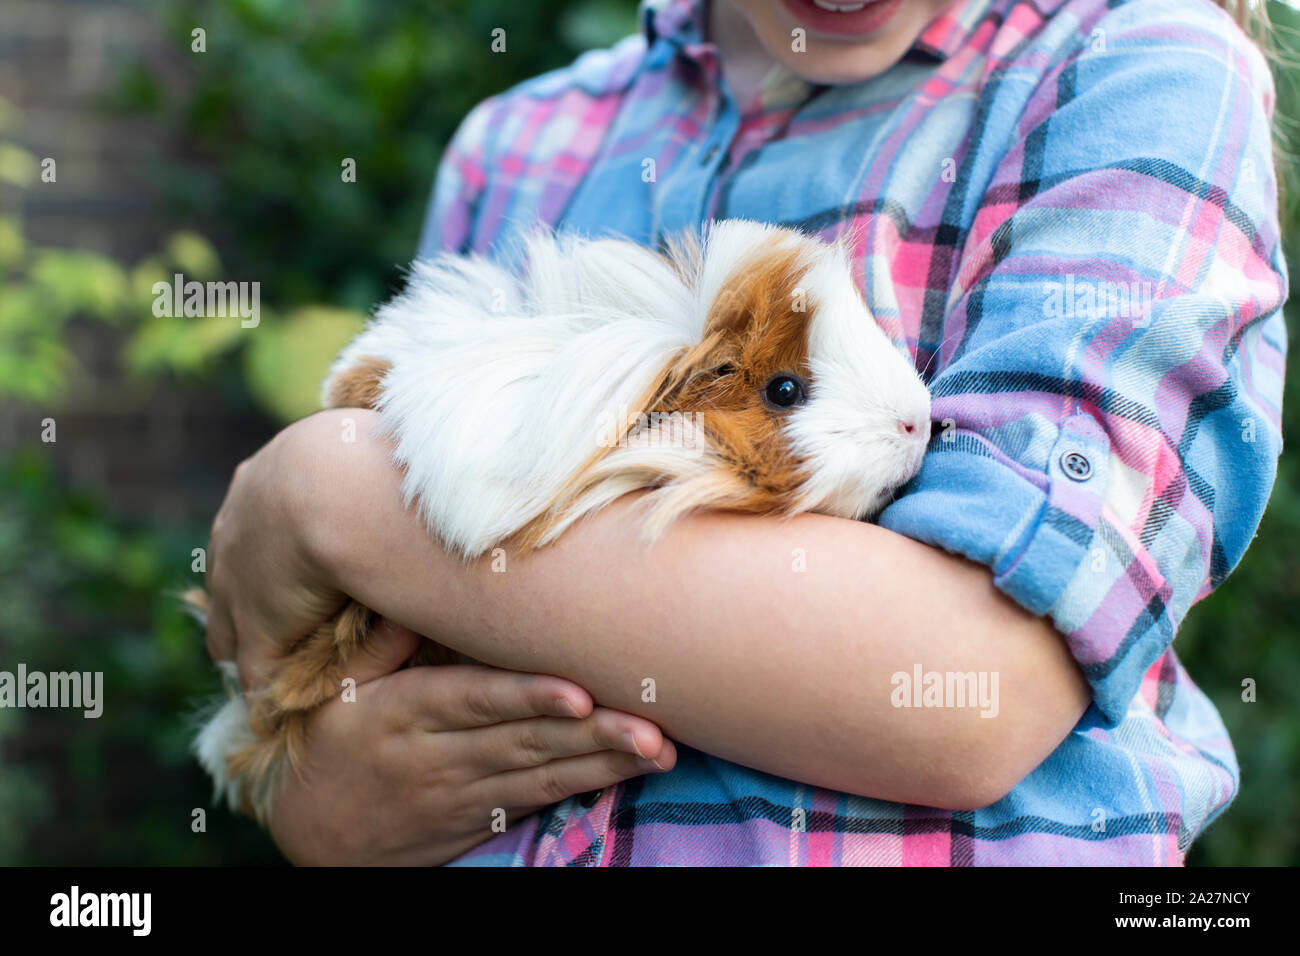 Close Up Of Girl Holding Pet Guinea Pig Outdoors In Garden Stock Photo